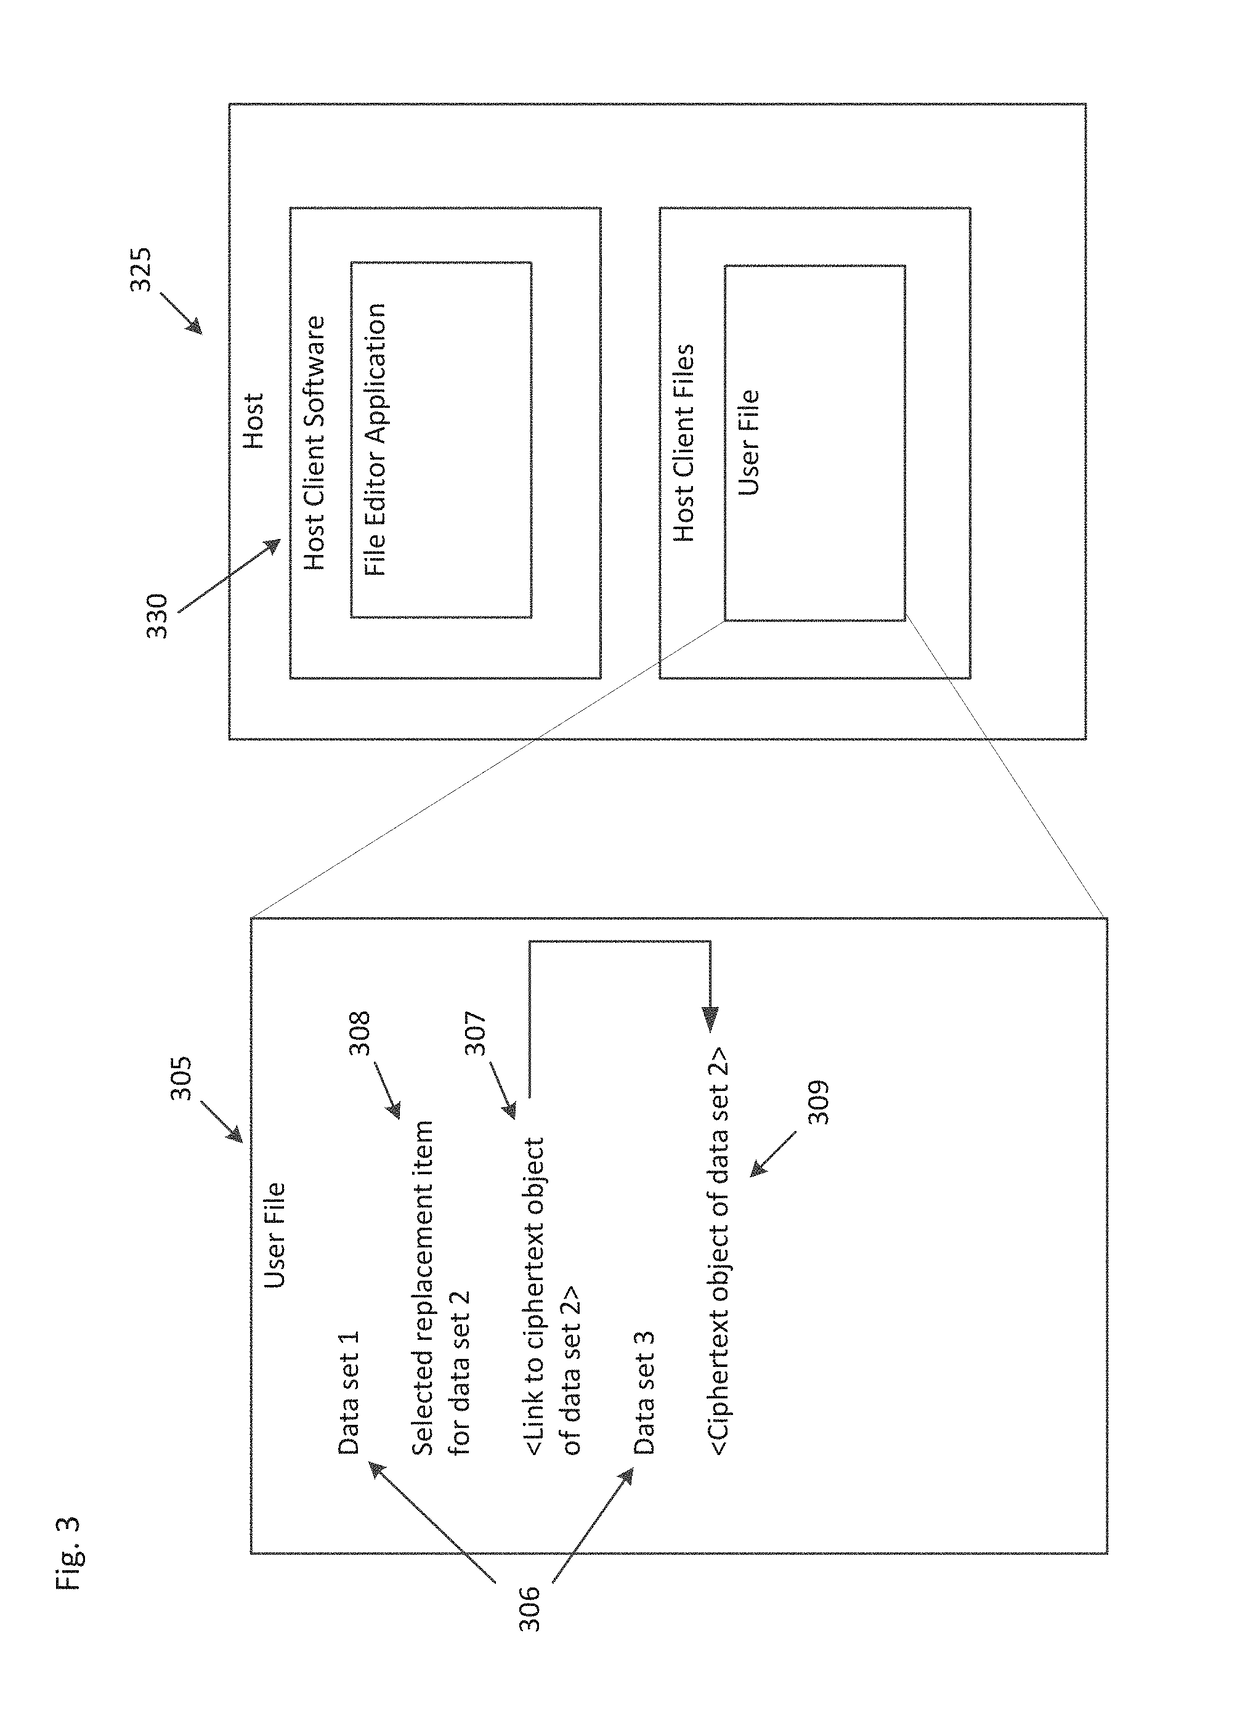 Securing portable data elements between containers in insecure shared memory space